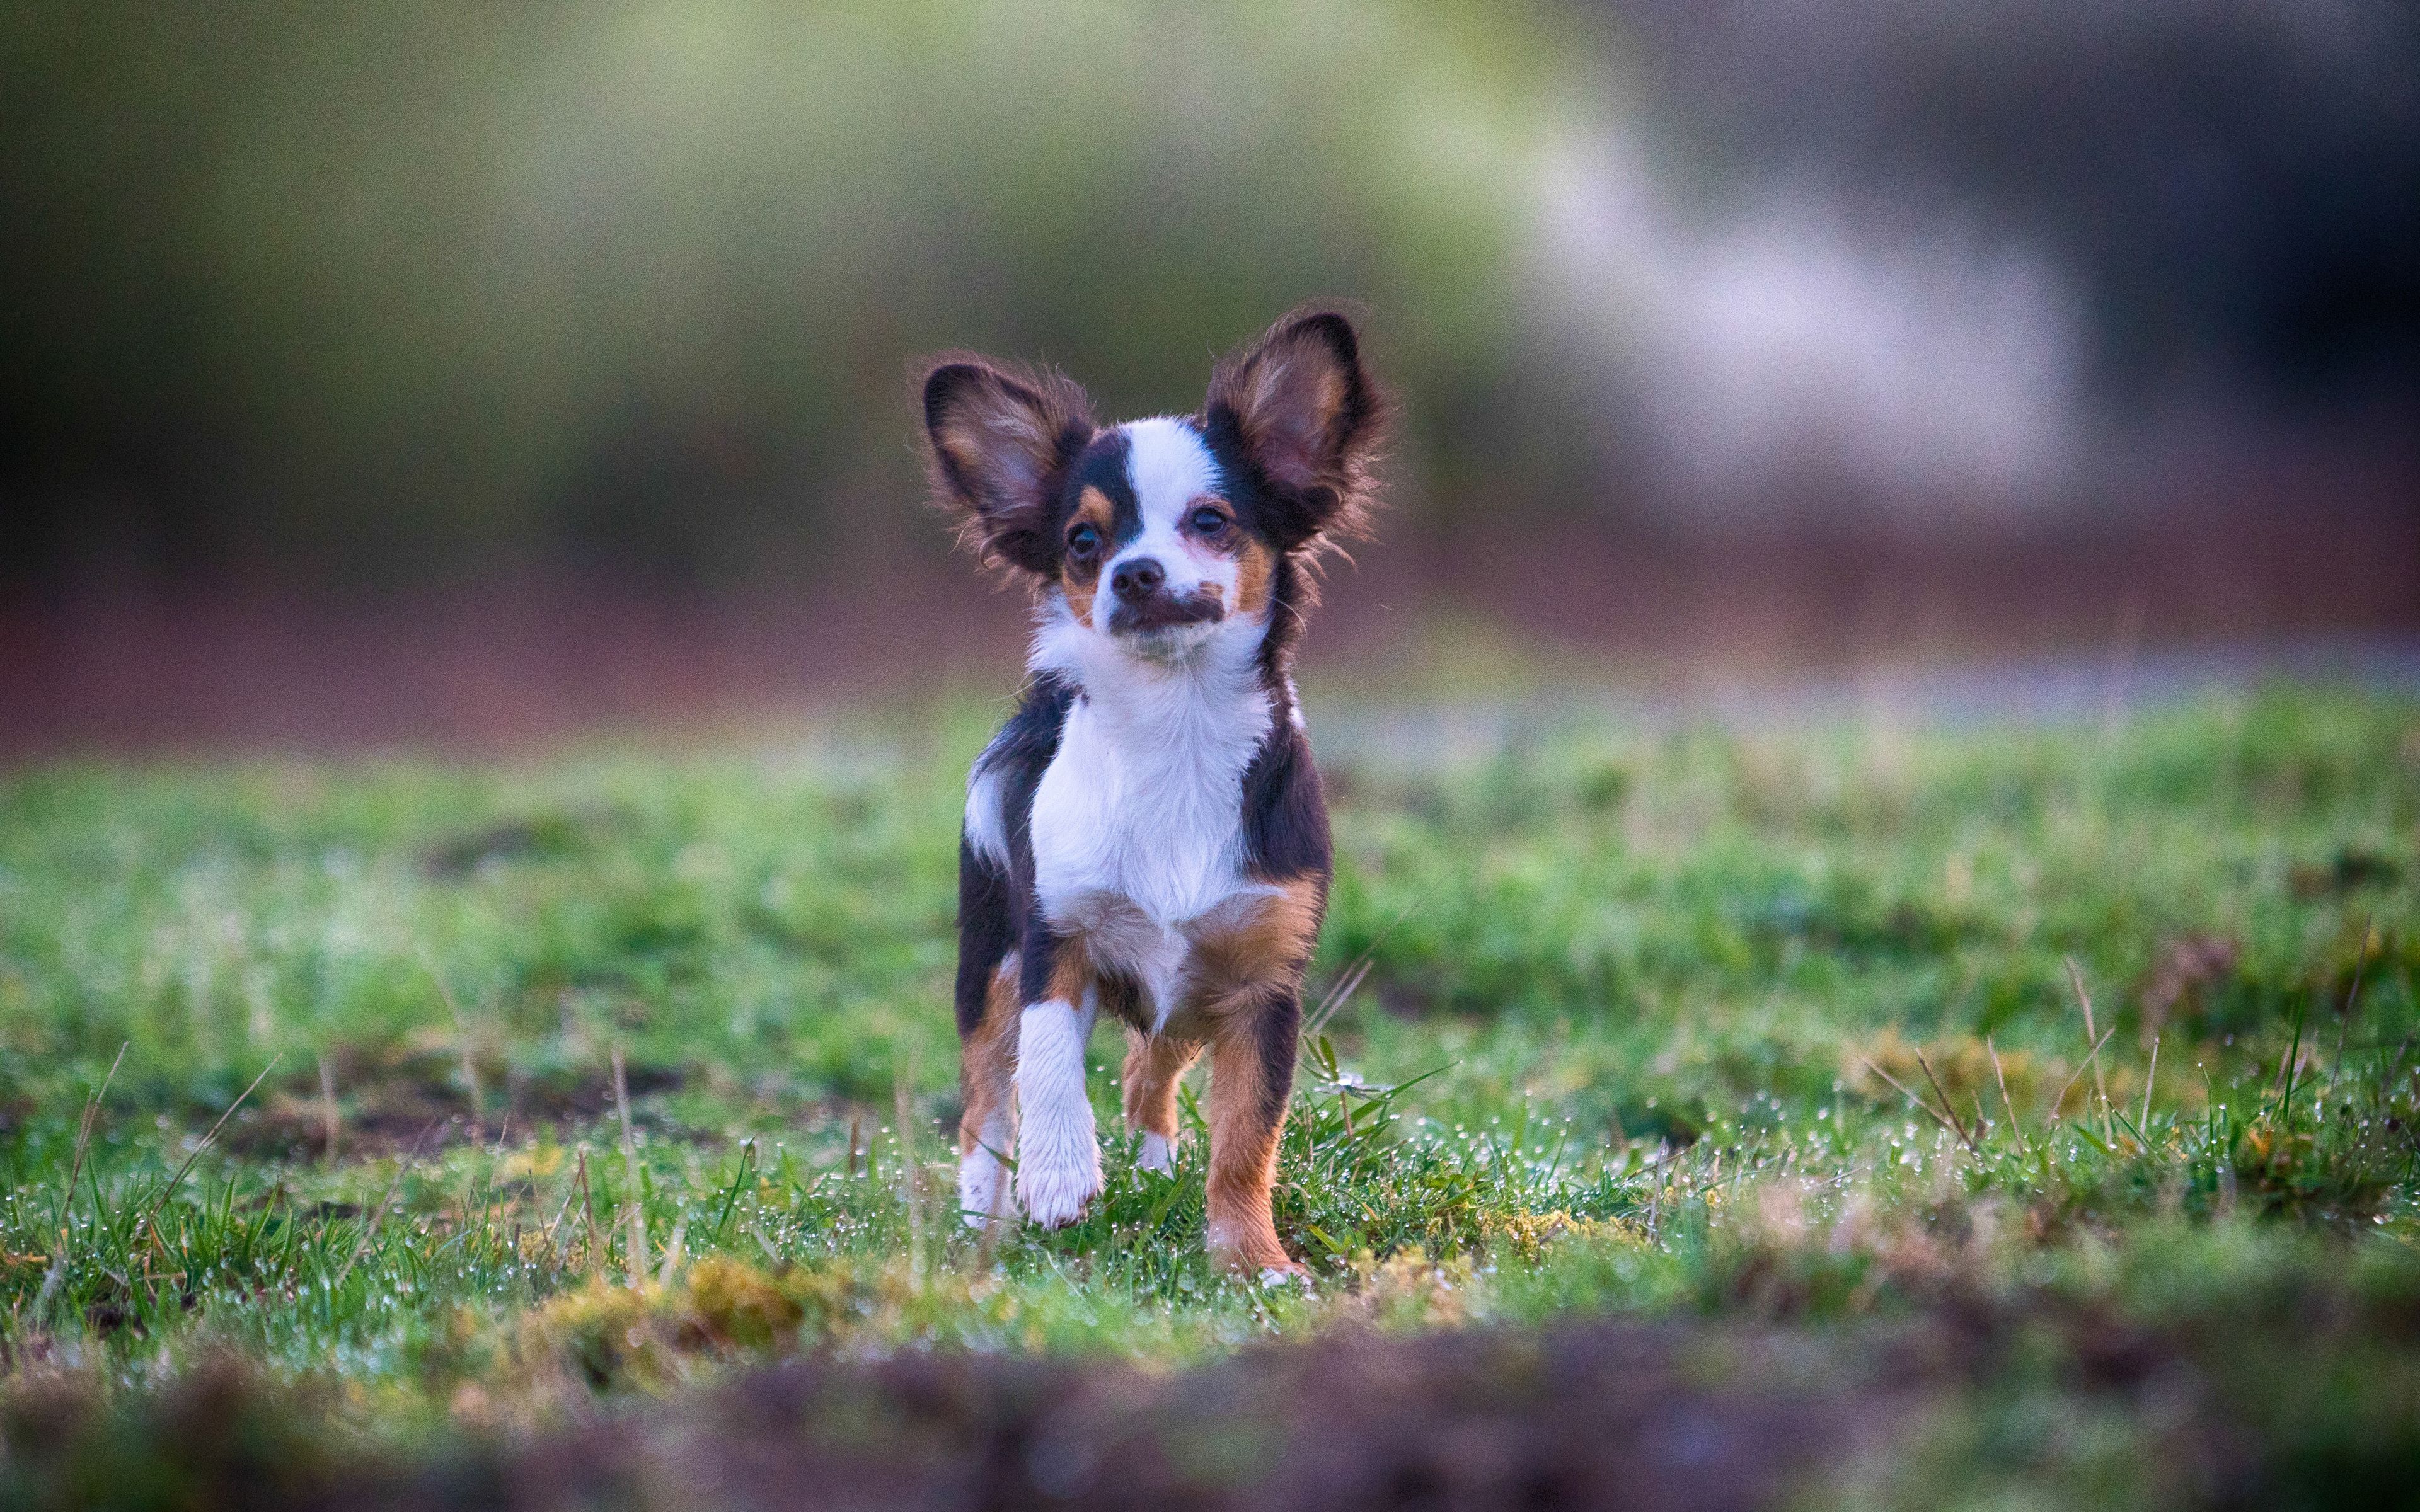 Download Wallpaper 4k, Chihuahua, Running Dog, Summer, Dogs, Black Brown Chihuahua, Cute Animals, Pets, Chihuahua Dog For Desktop With Resolution 3840x2400. High Quality HD Picture Wallpaper